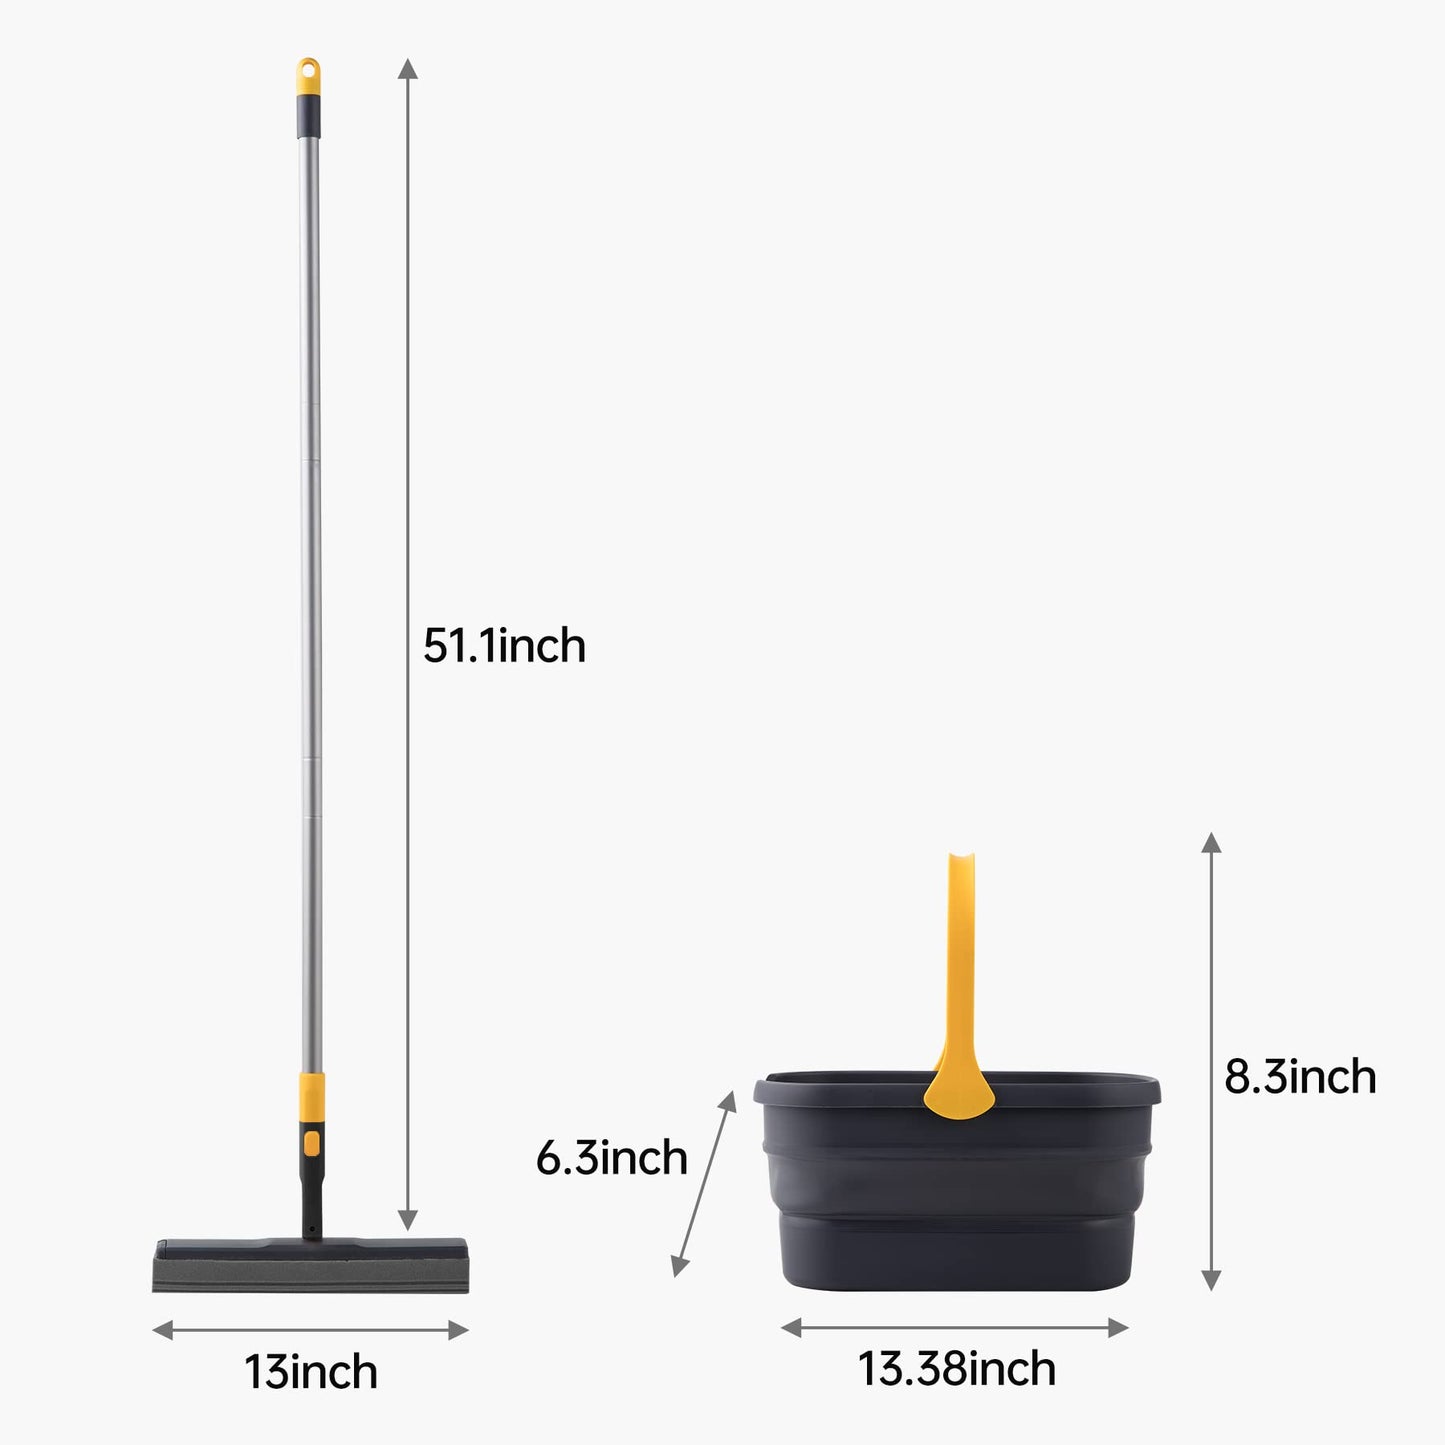 Yocada Mop and Bucket with Wringer Set Sponge Mop and Collapsible Bucket Kit for Home Commercial Tile Floor Bathroom Garage Cleaning with Total 2 Sponge Heads Easily Dry Wringing